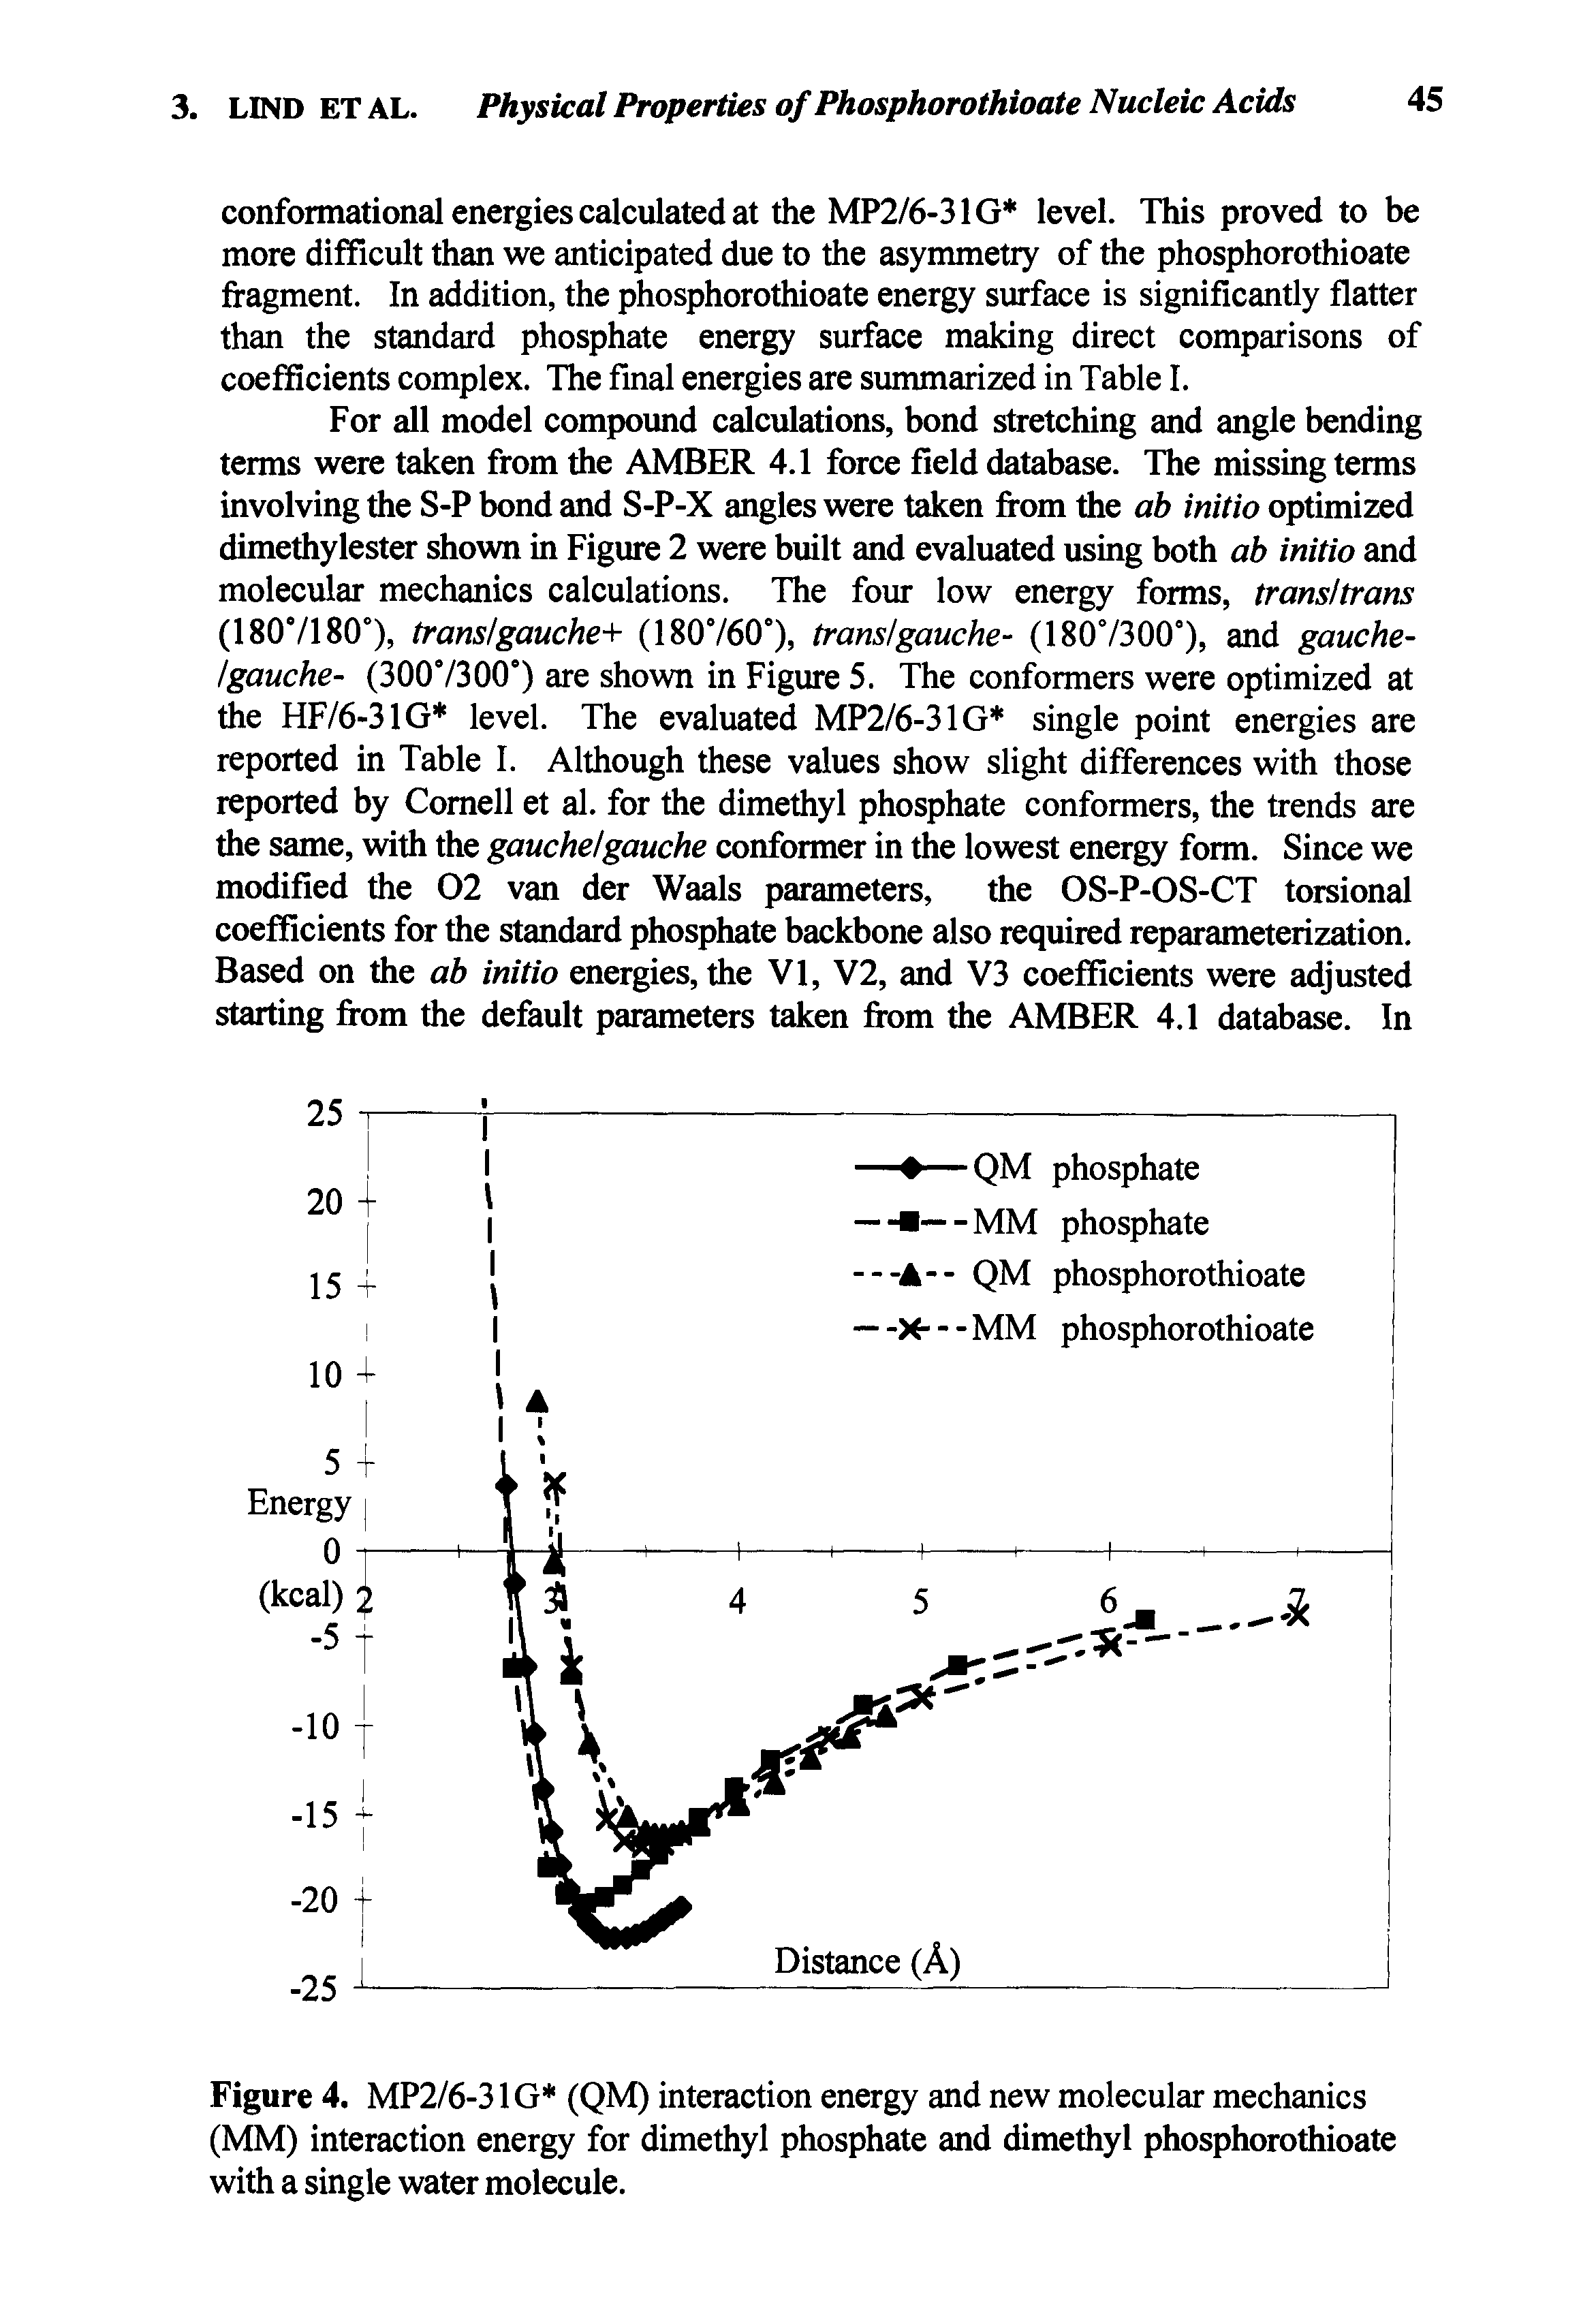 Figure 4. MP2/6-31G (QM) interaction energy and new molecular mechanics (MM) interaction energy for dimethyl phosphate and dimethyl phosphorothioate with a single water molecule.